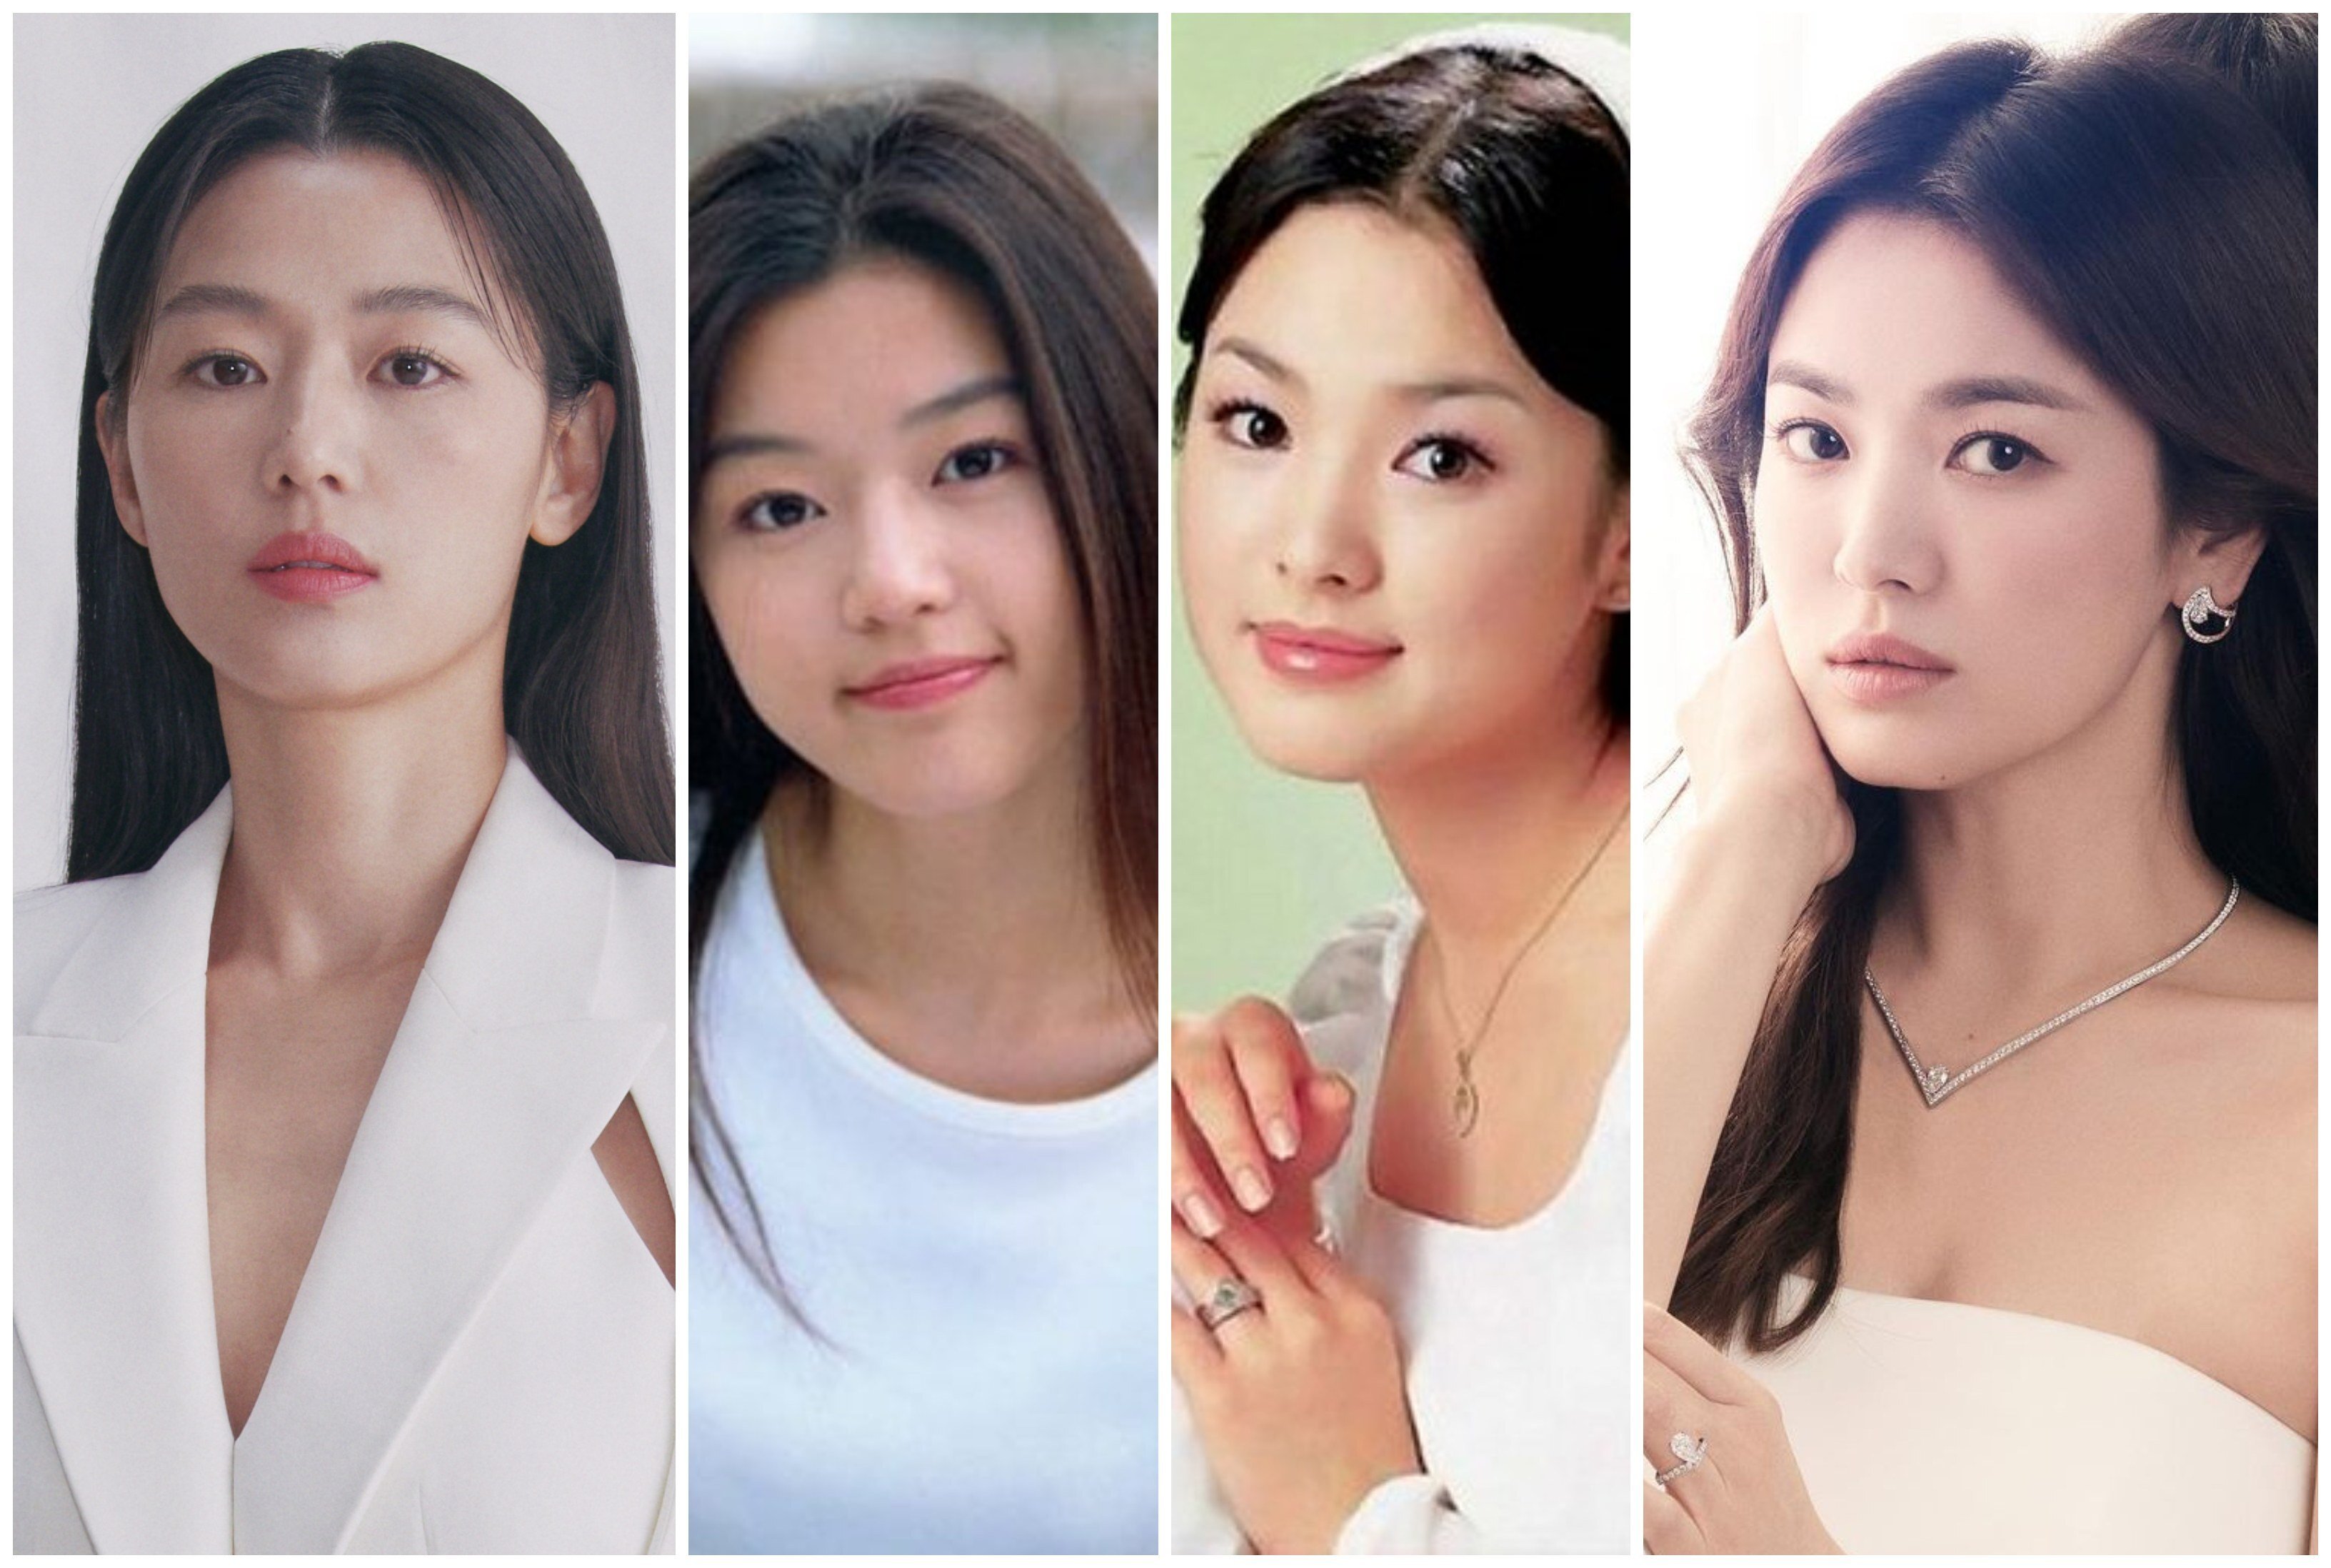 Is 40 the new 20? K-drama stars Jun Ji-hyun and Song Hye-kyo certainly prove it is. Photos: Alexander McQueen, My Sassy Girl, Autumn in My Heart and Chaumet